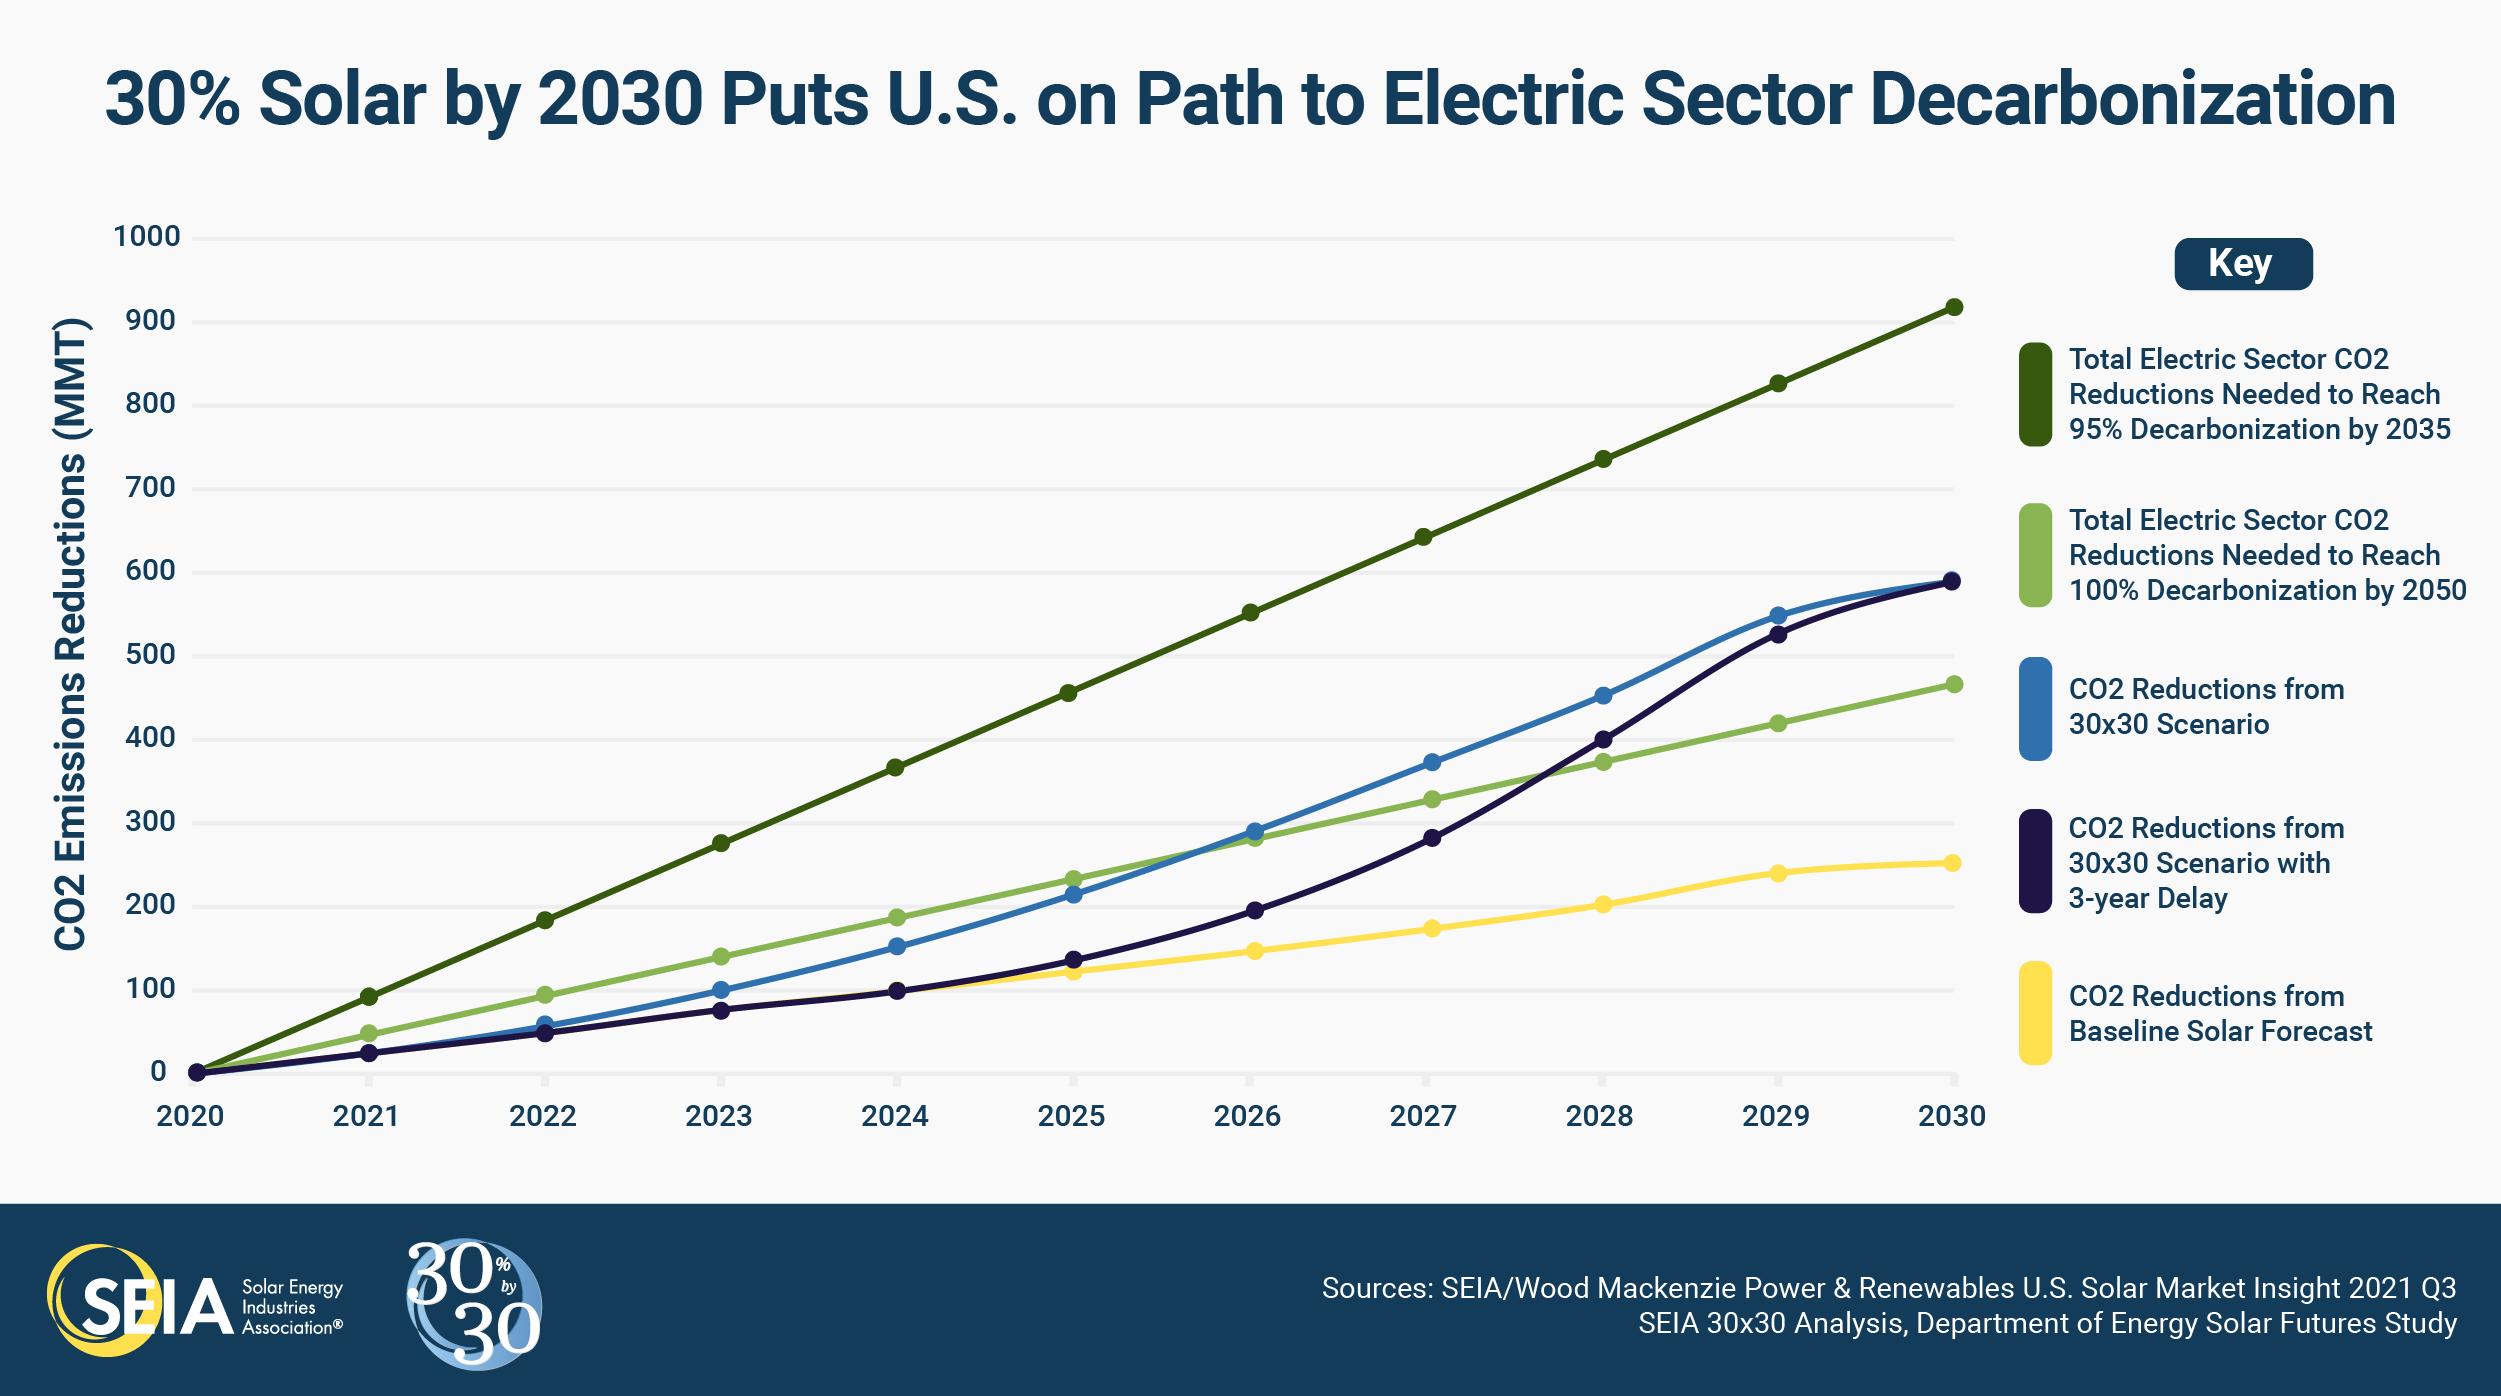 Graph showing path to electric sector decarbonization